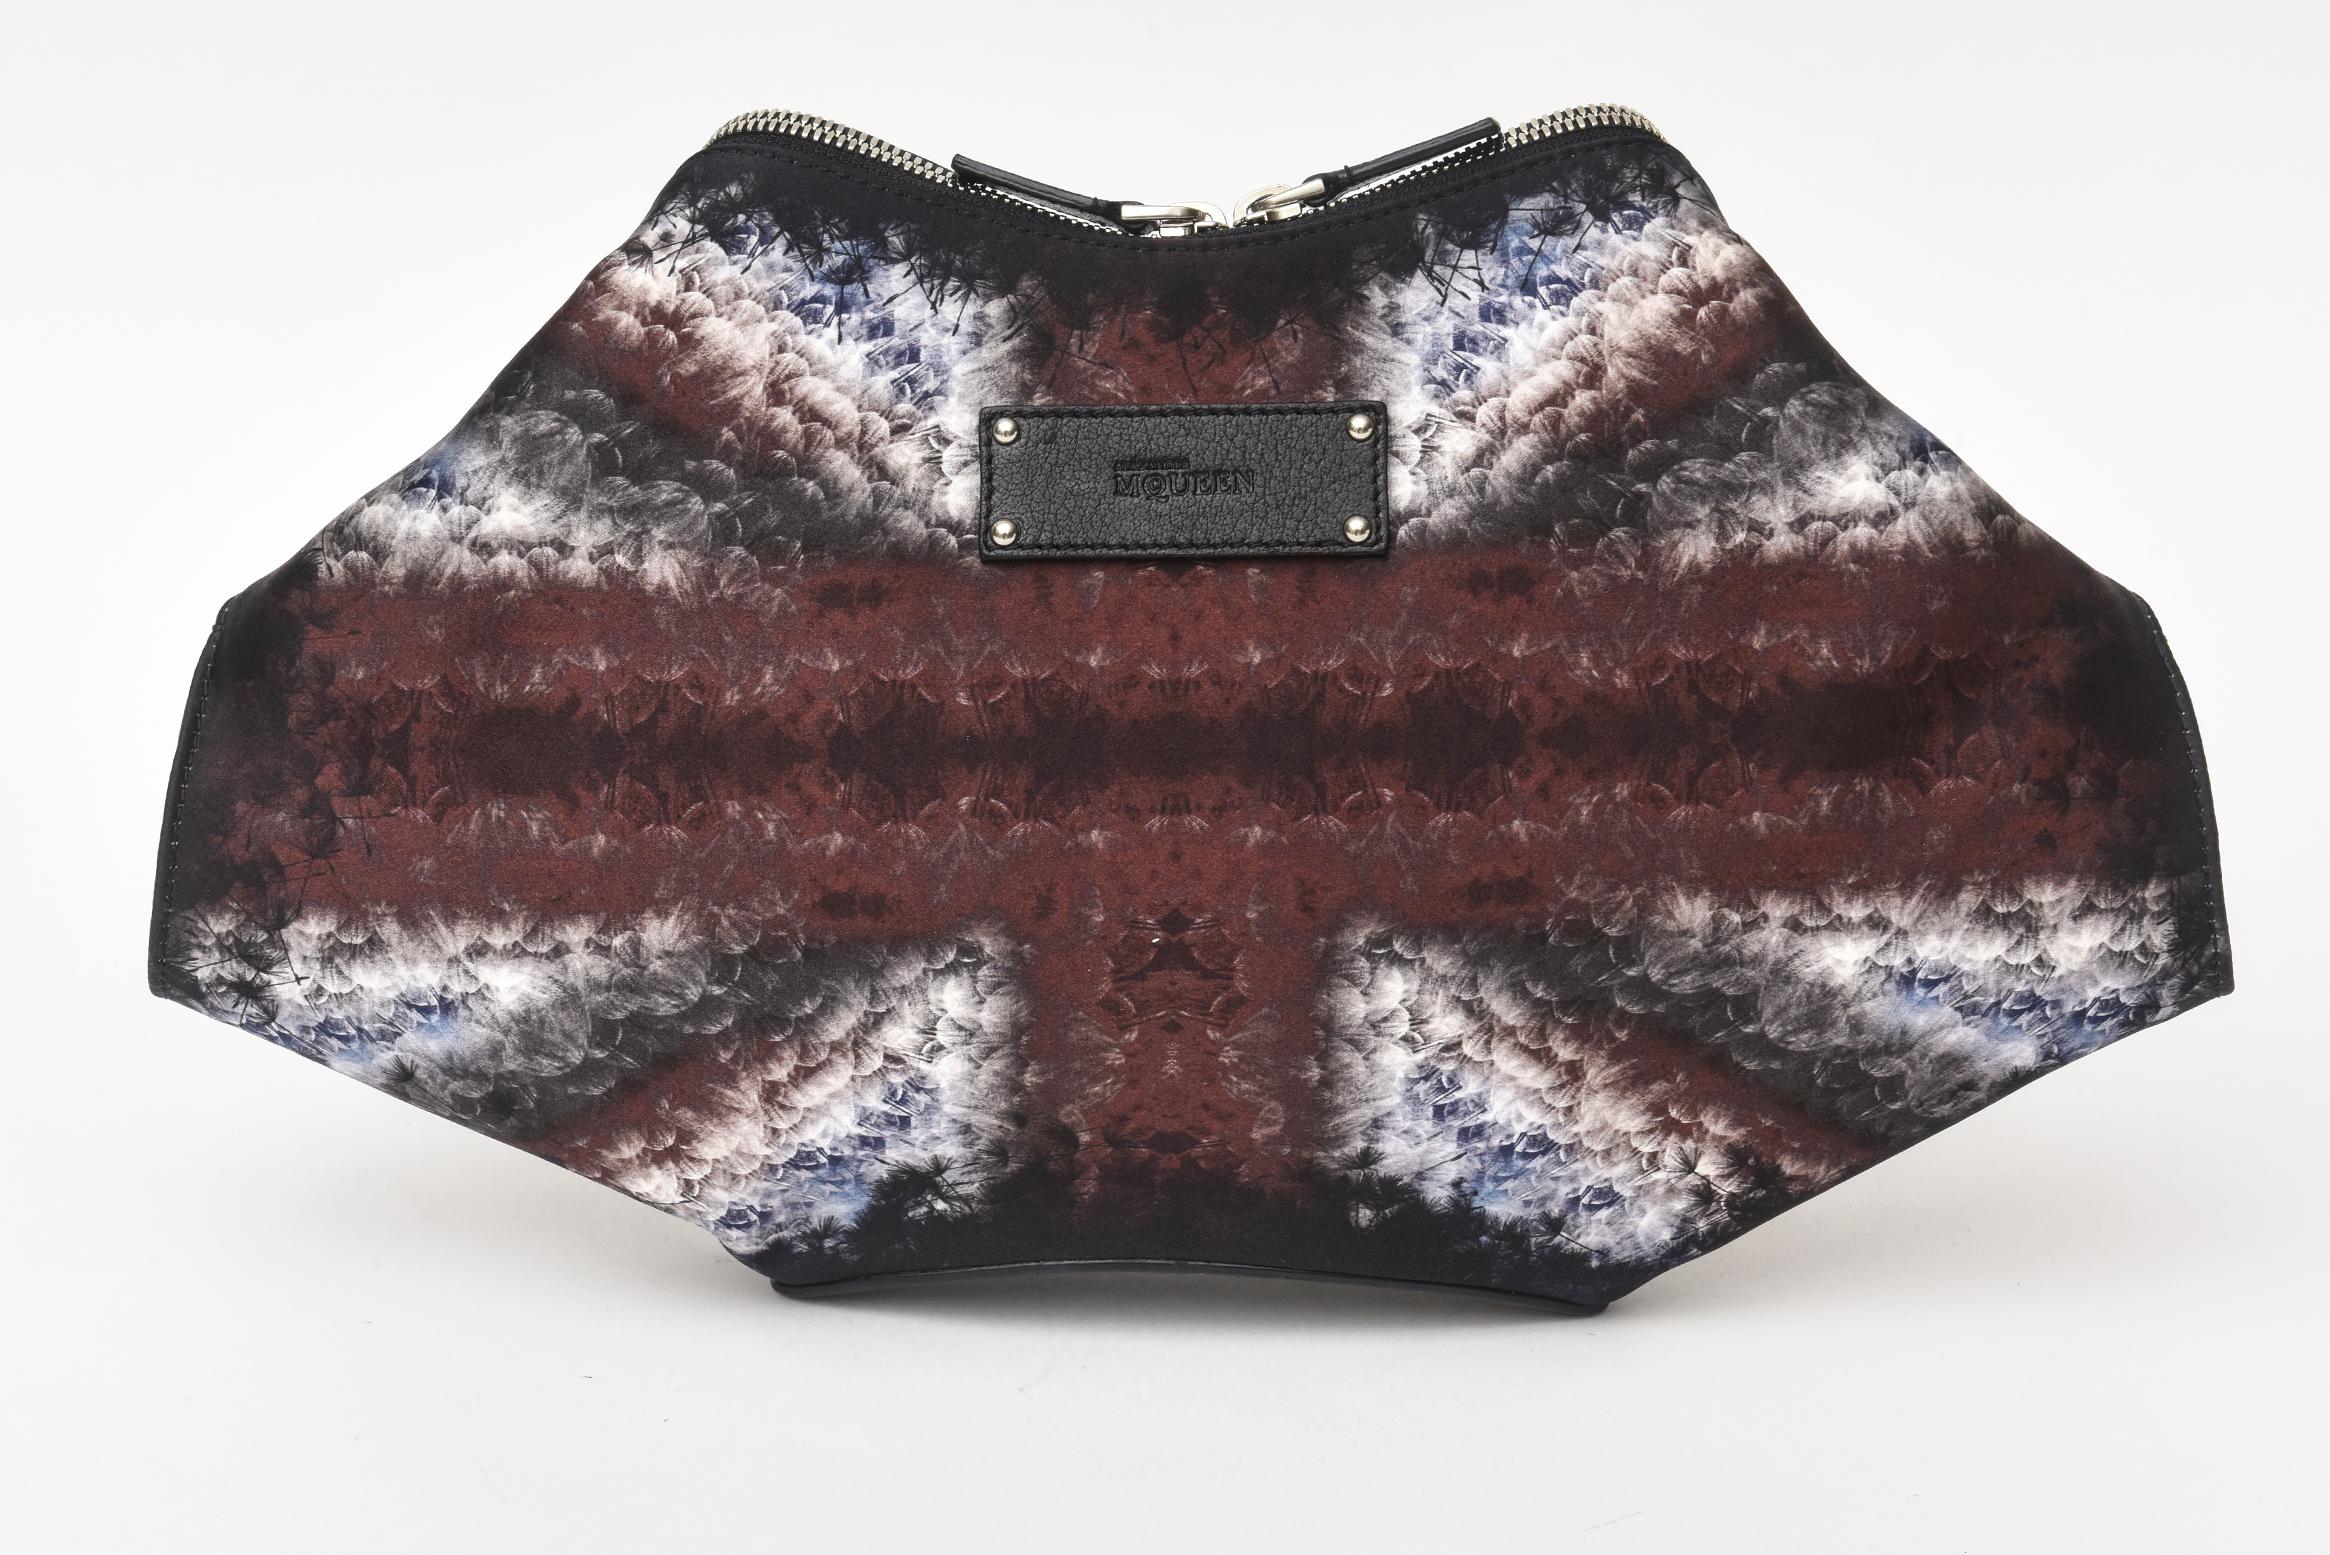 This never used stunning Alexander McQueen De Manta clutch is silk satin with the folded details and magnetic closures with zippered tops. The colors are more dark and moody and the design is suppose to represent the English flag. The other side has